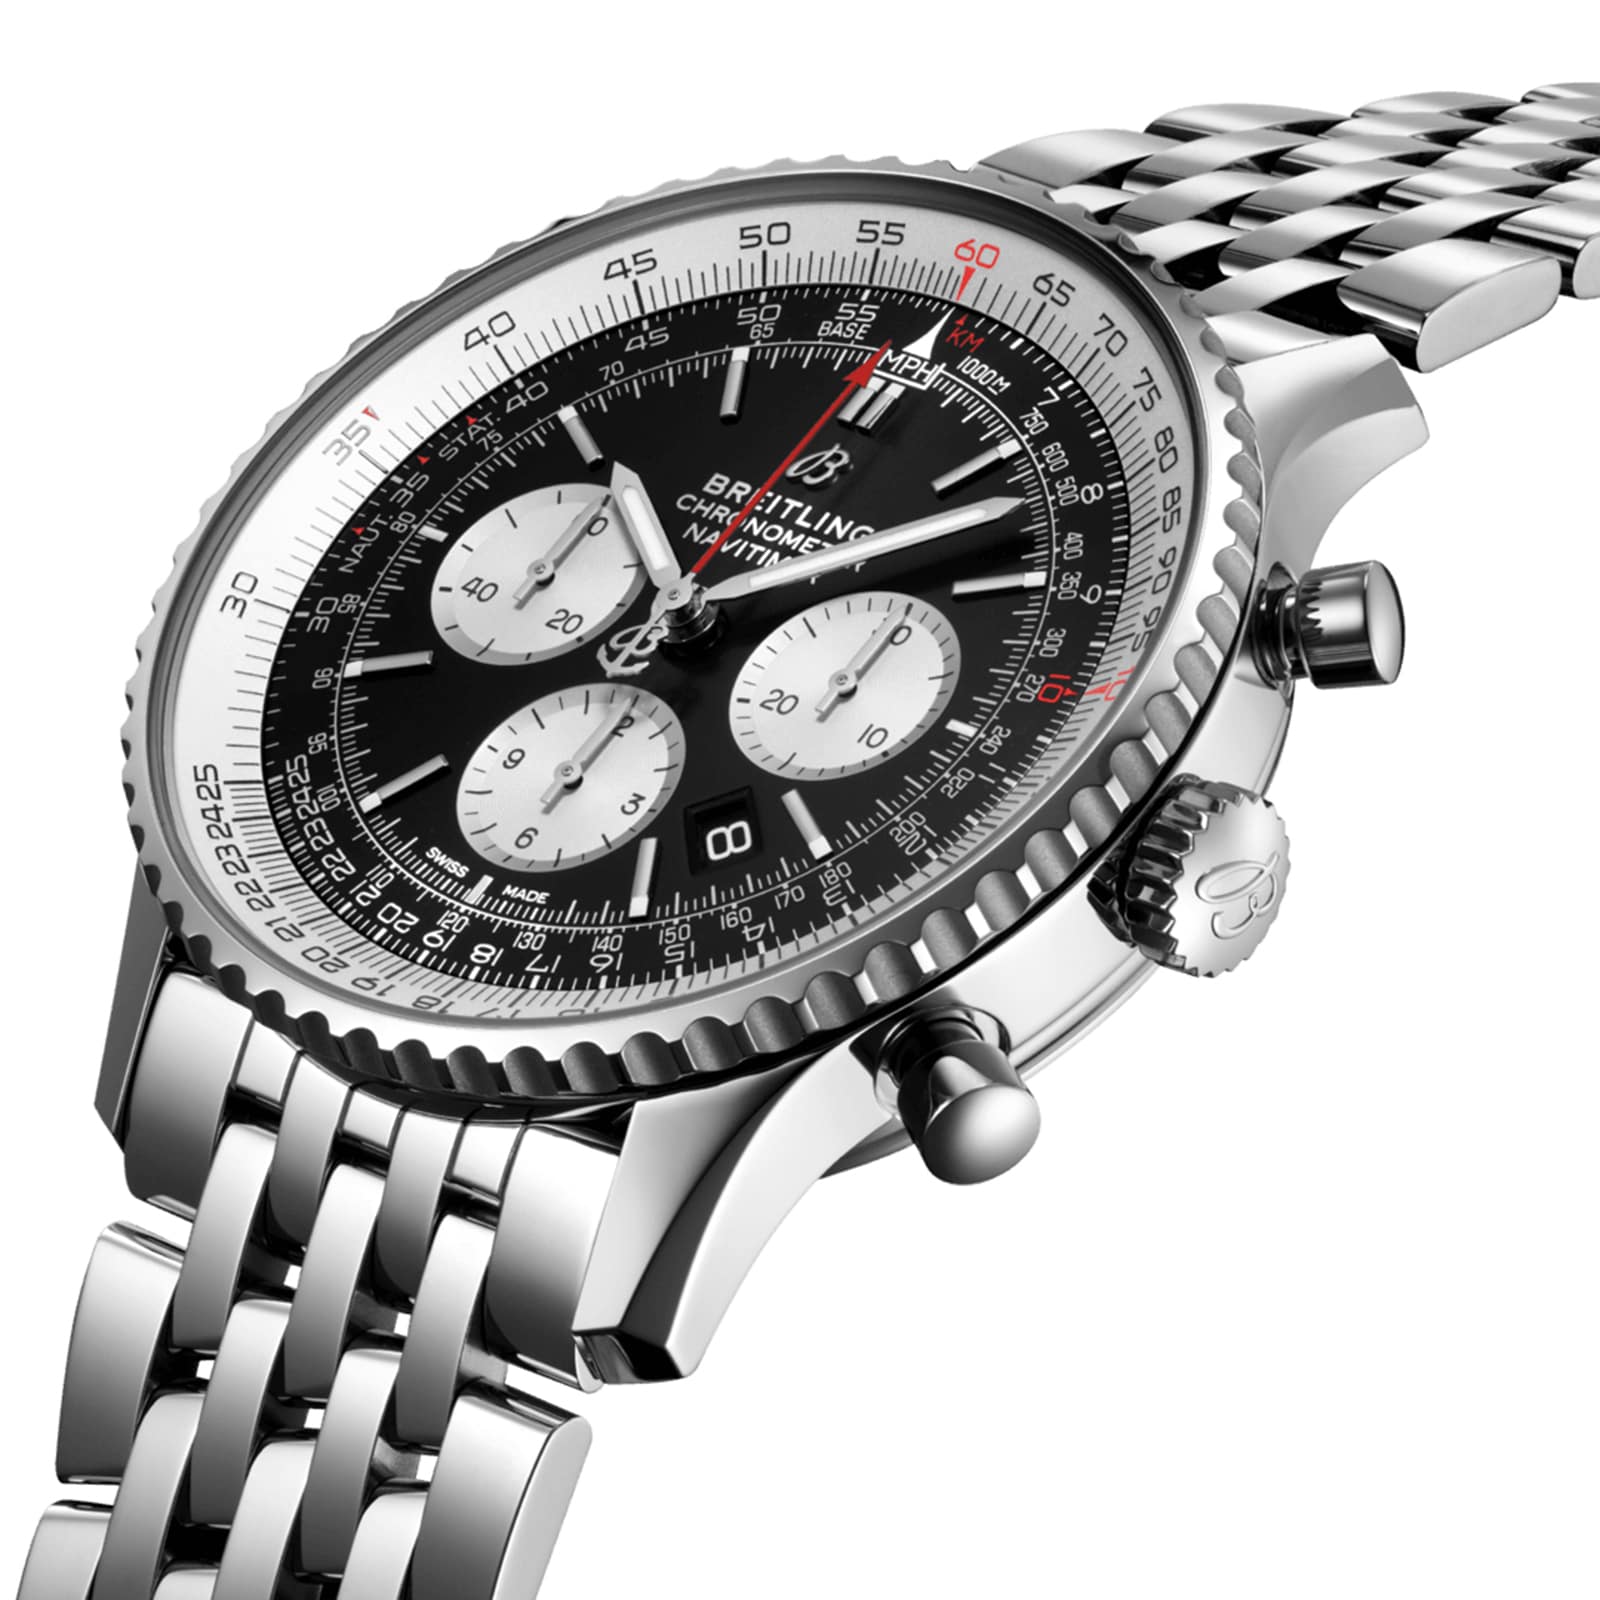 Breitling Navitimer Automatic B01 Chronograph 46 Stainless Steel ...